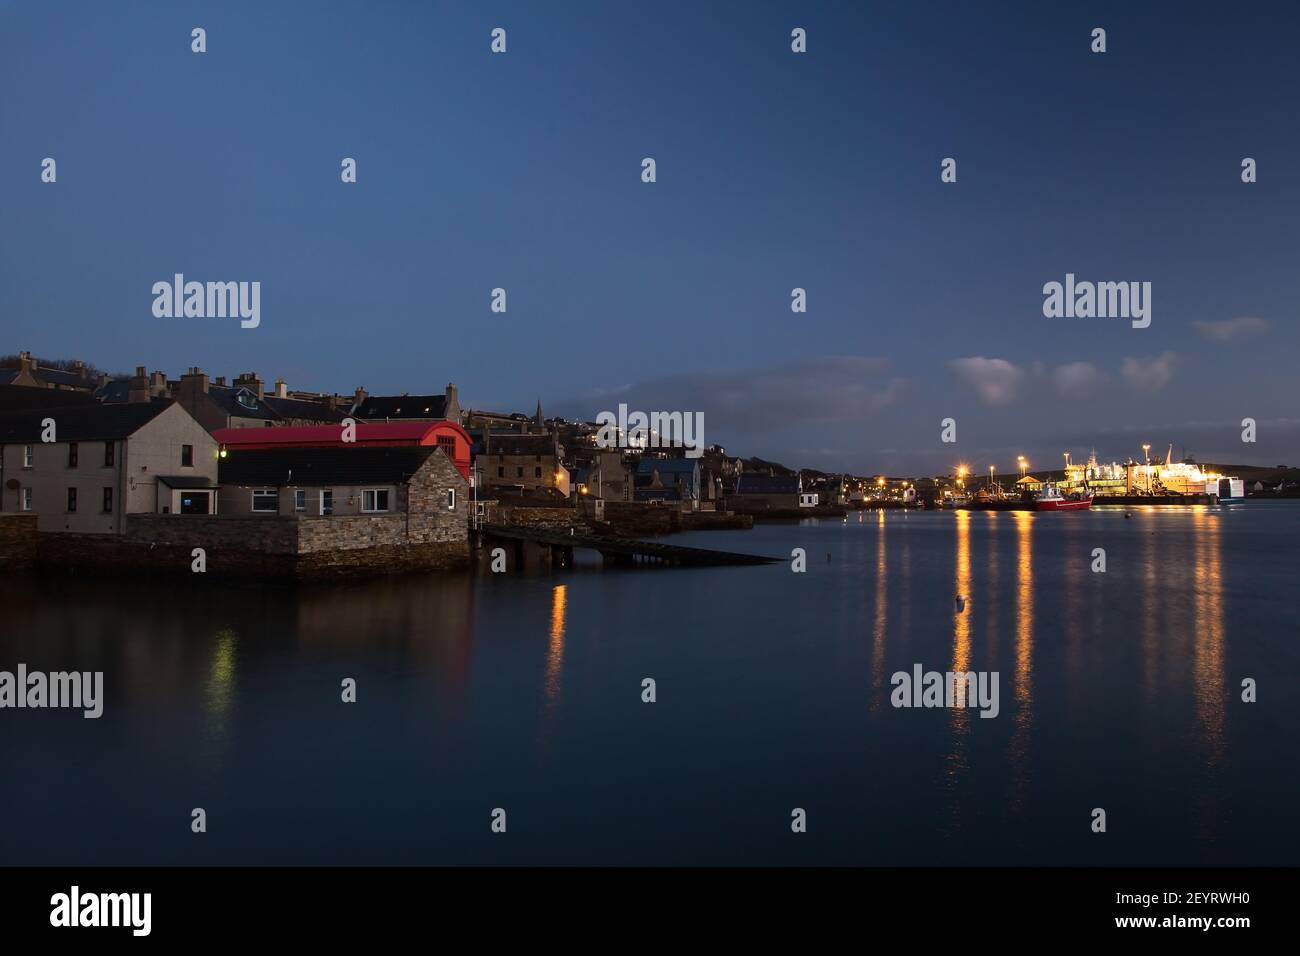 Early morning waterfront view of scottish town with blue sky vintage buildings and lights Stock Photo